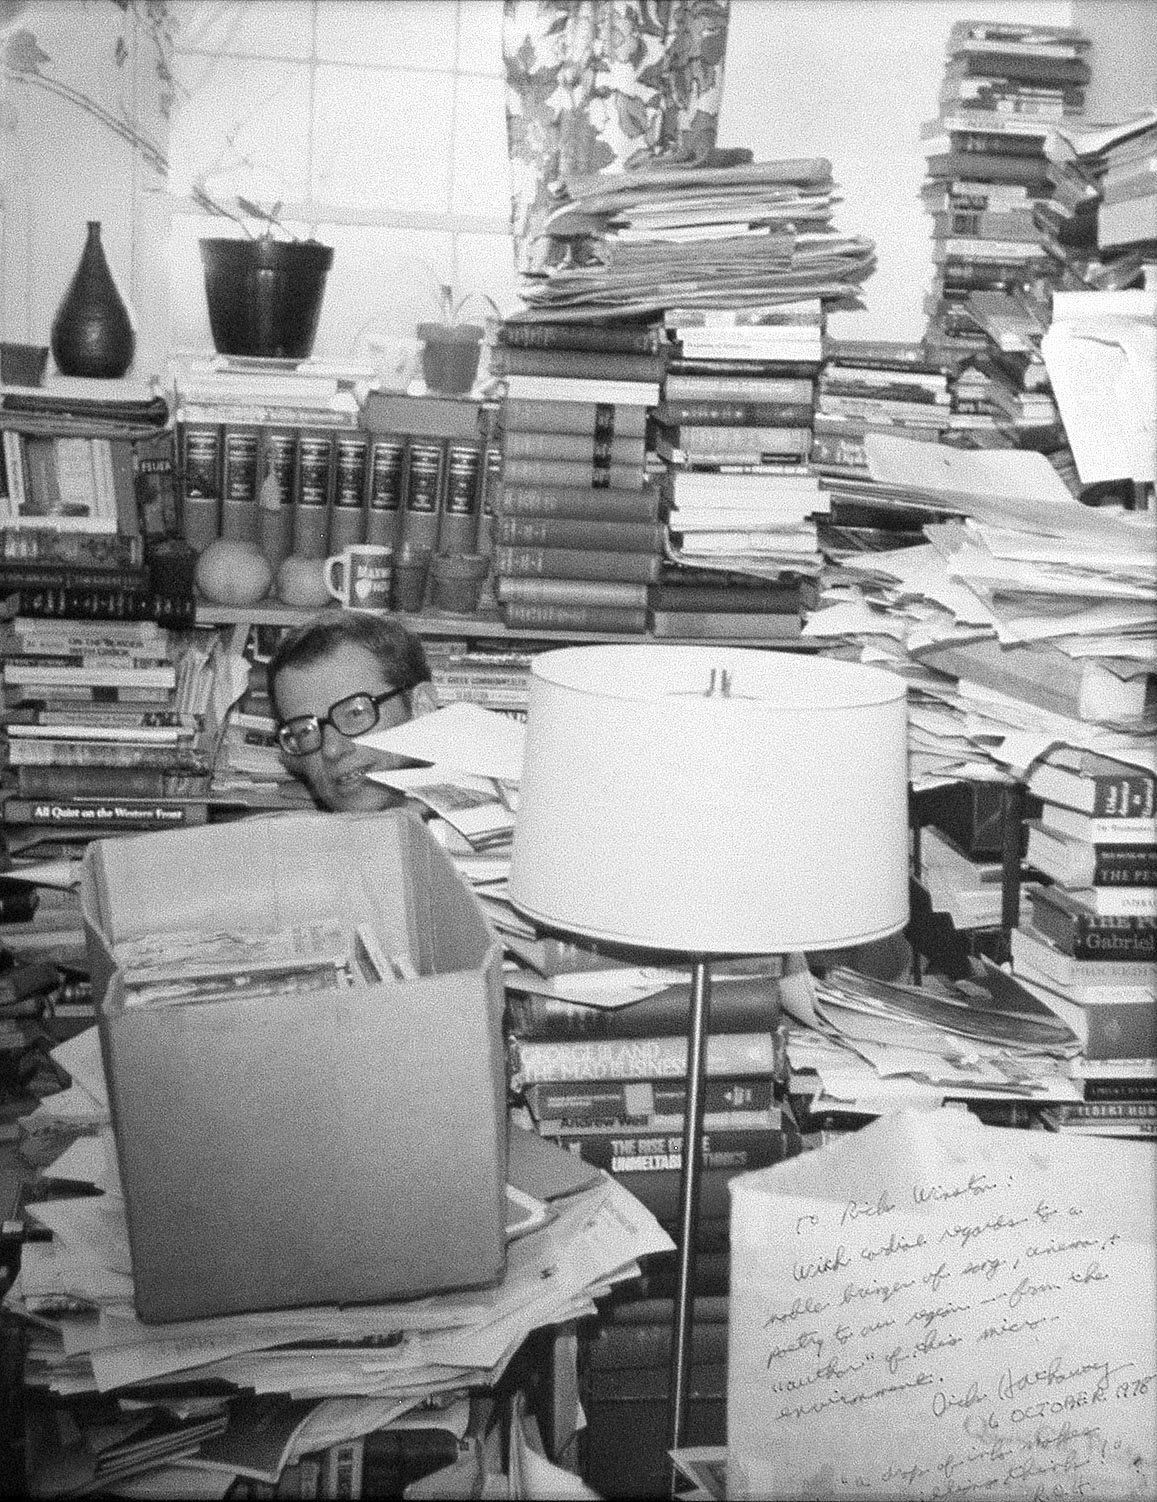 Richard Hathaway sitting at desk behind piles of paper